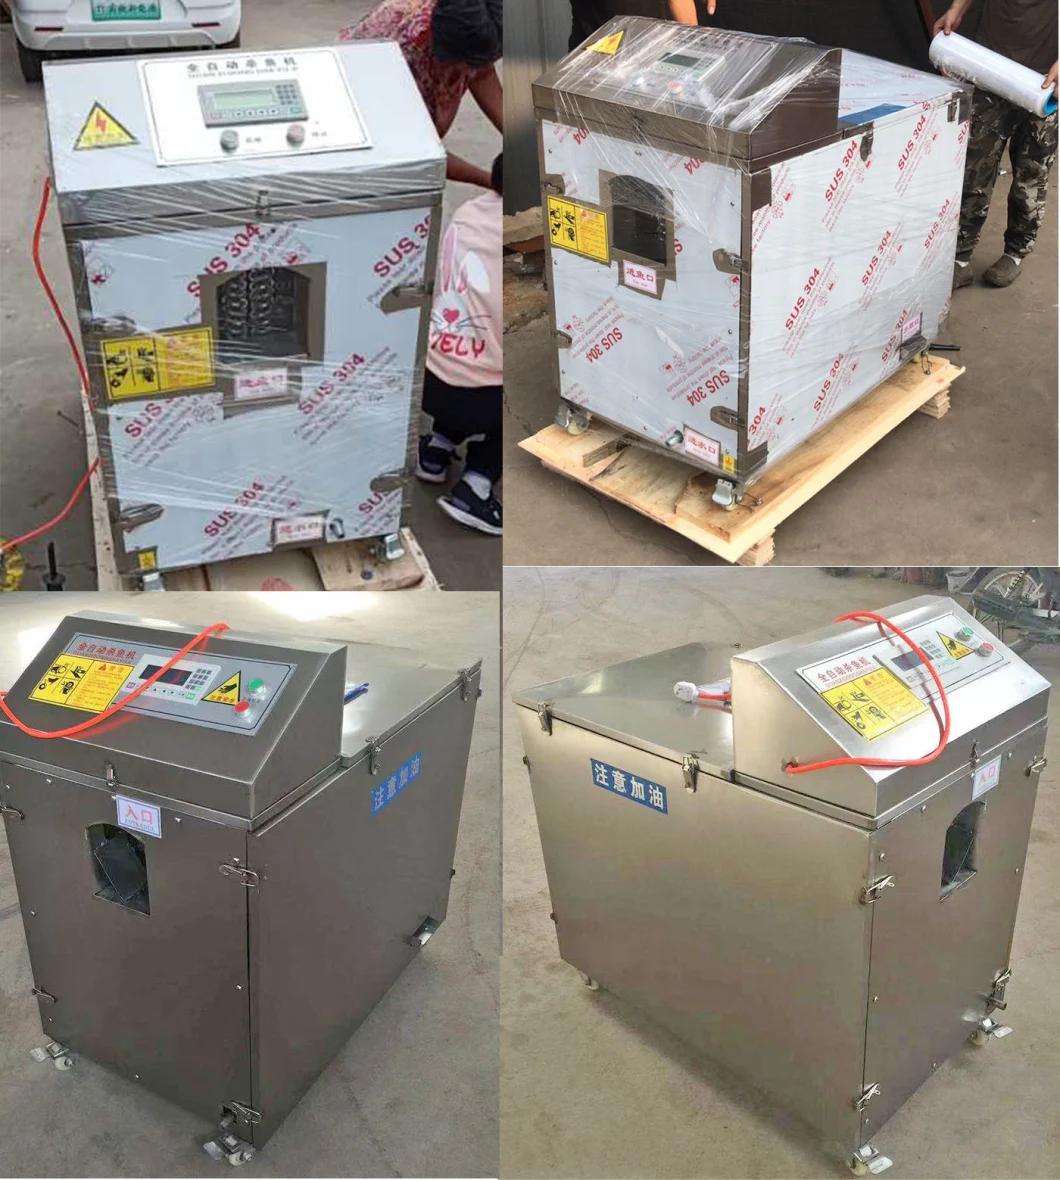 Automatic Fish Cleaning Processing Machine Fish Scaling and Gutting Machine